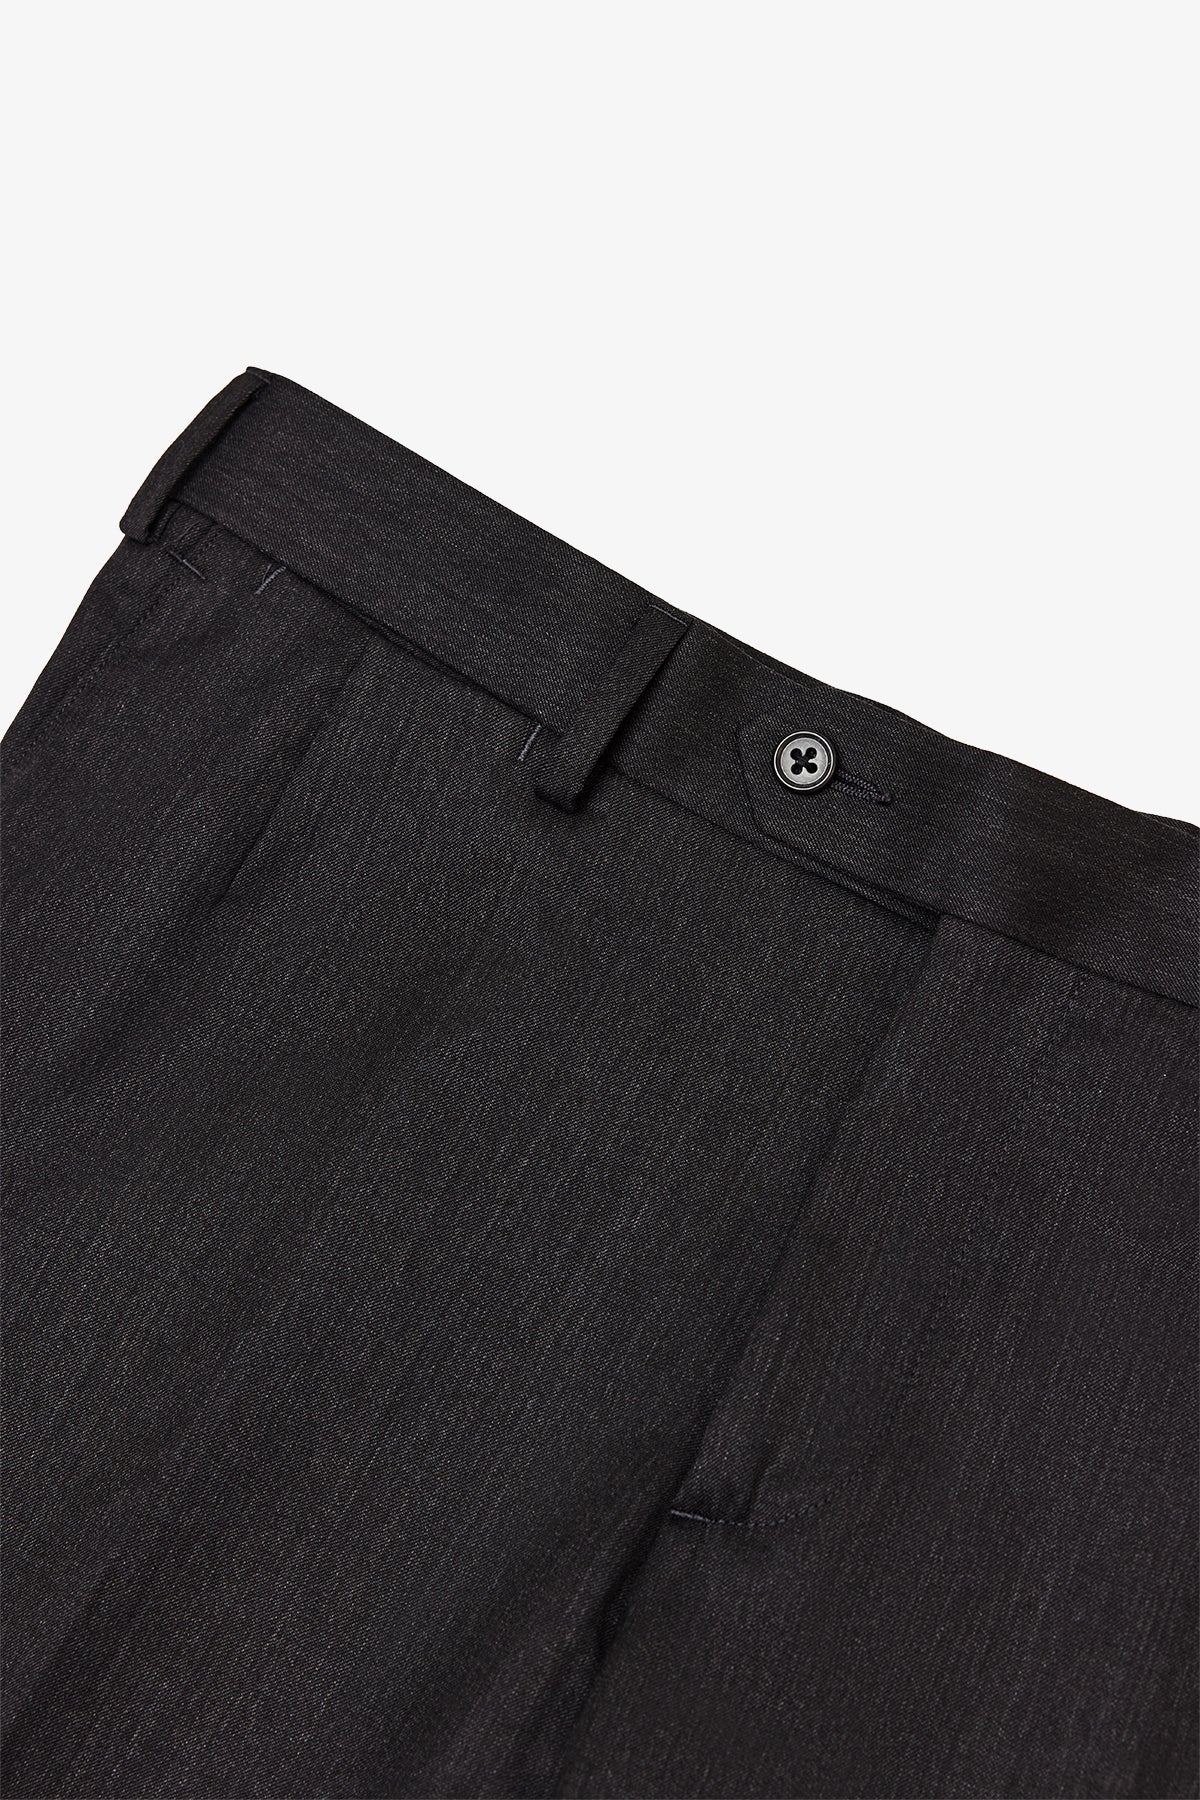 Tives - Charcoal Trouser